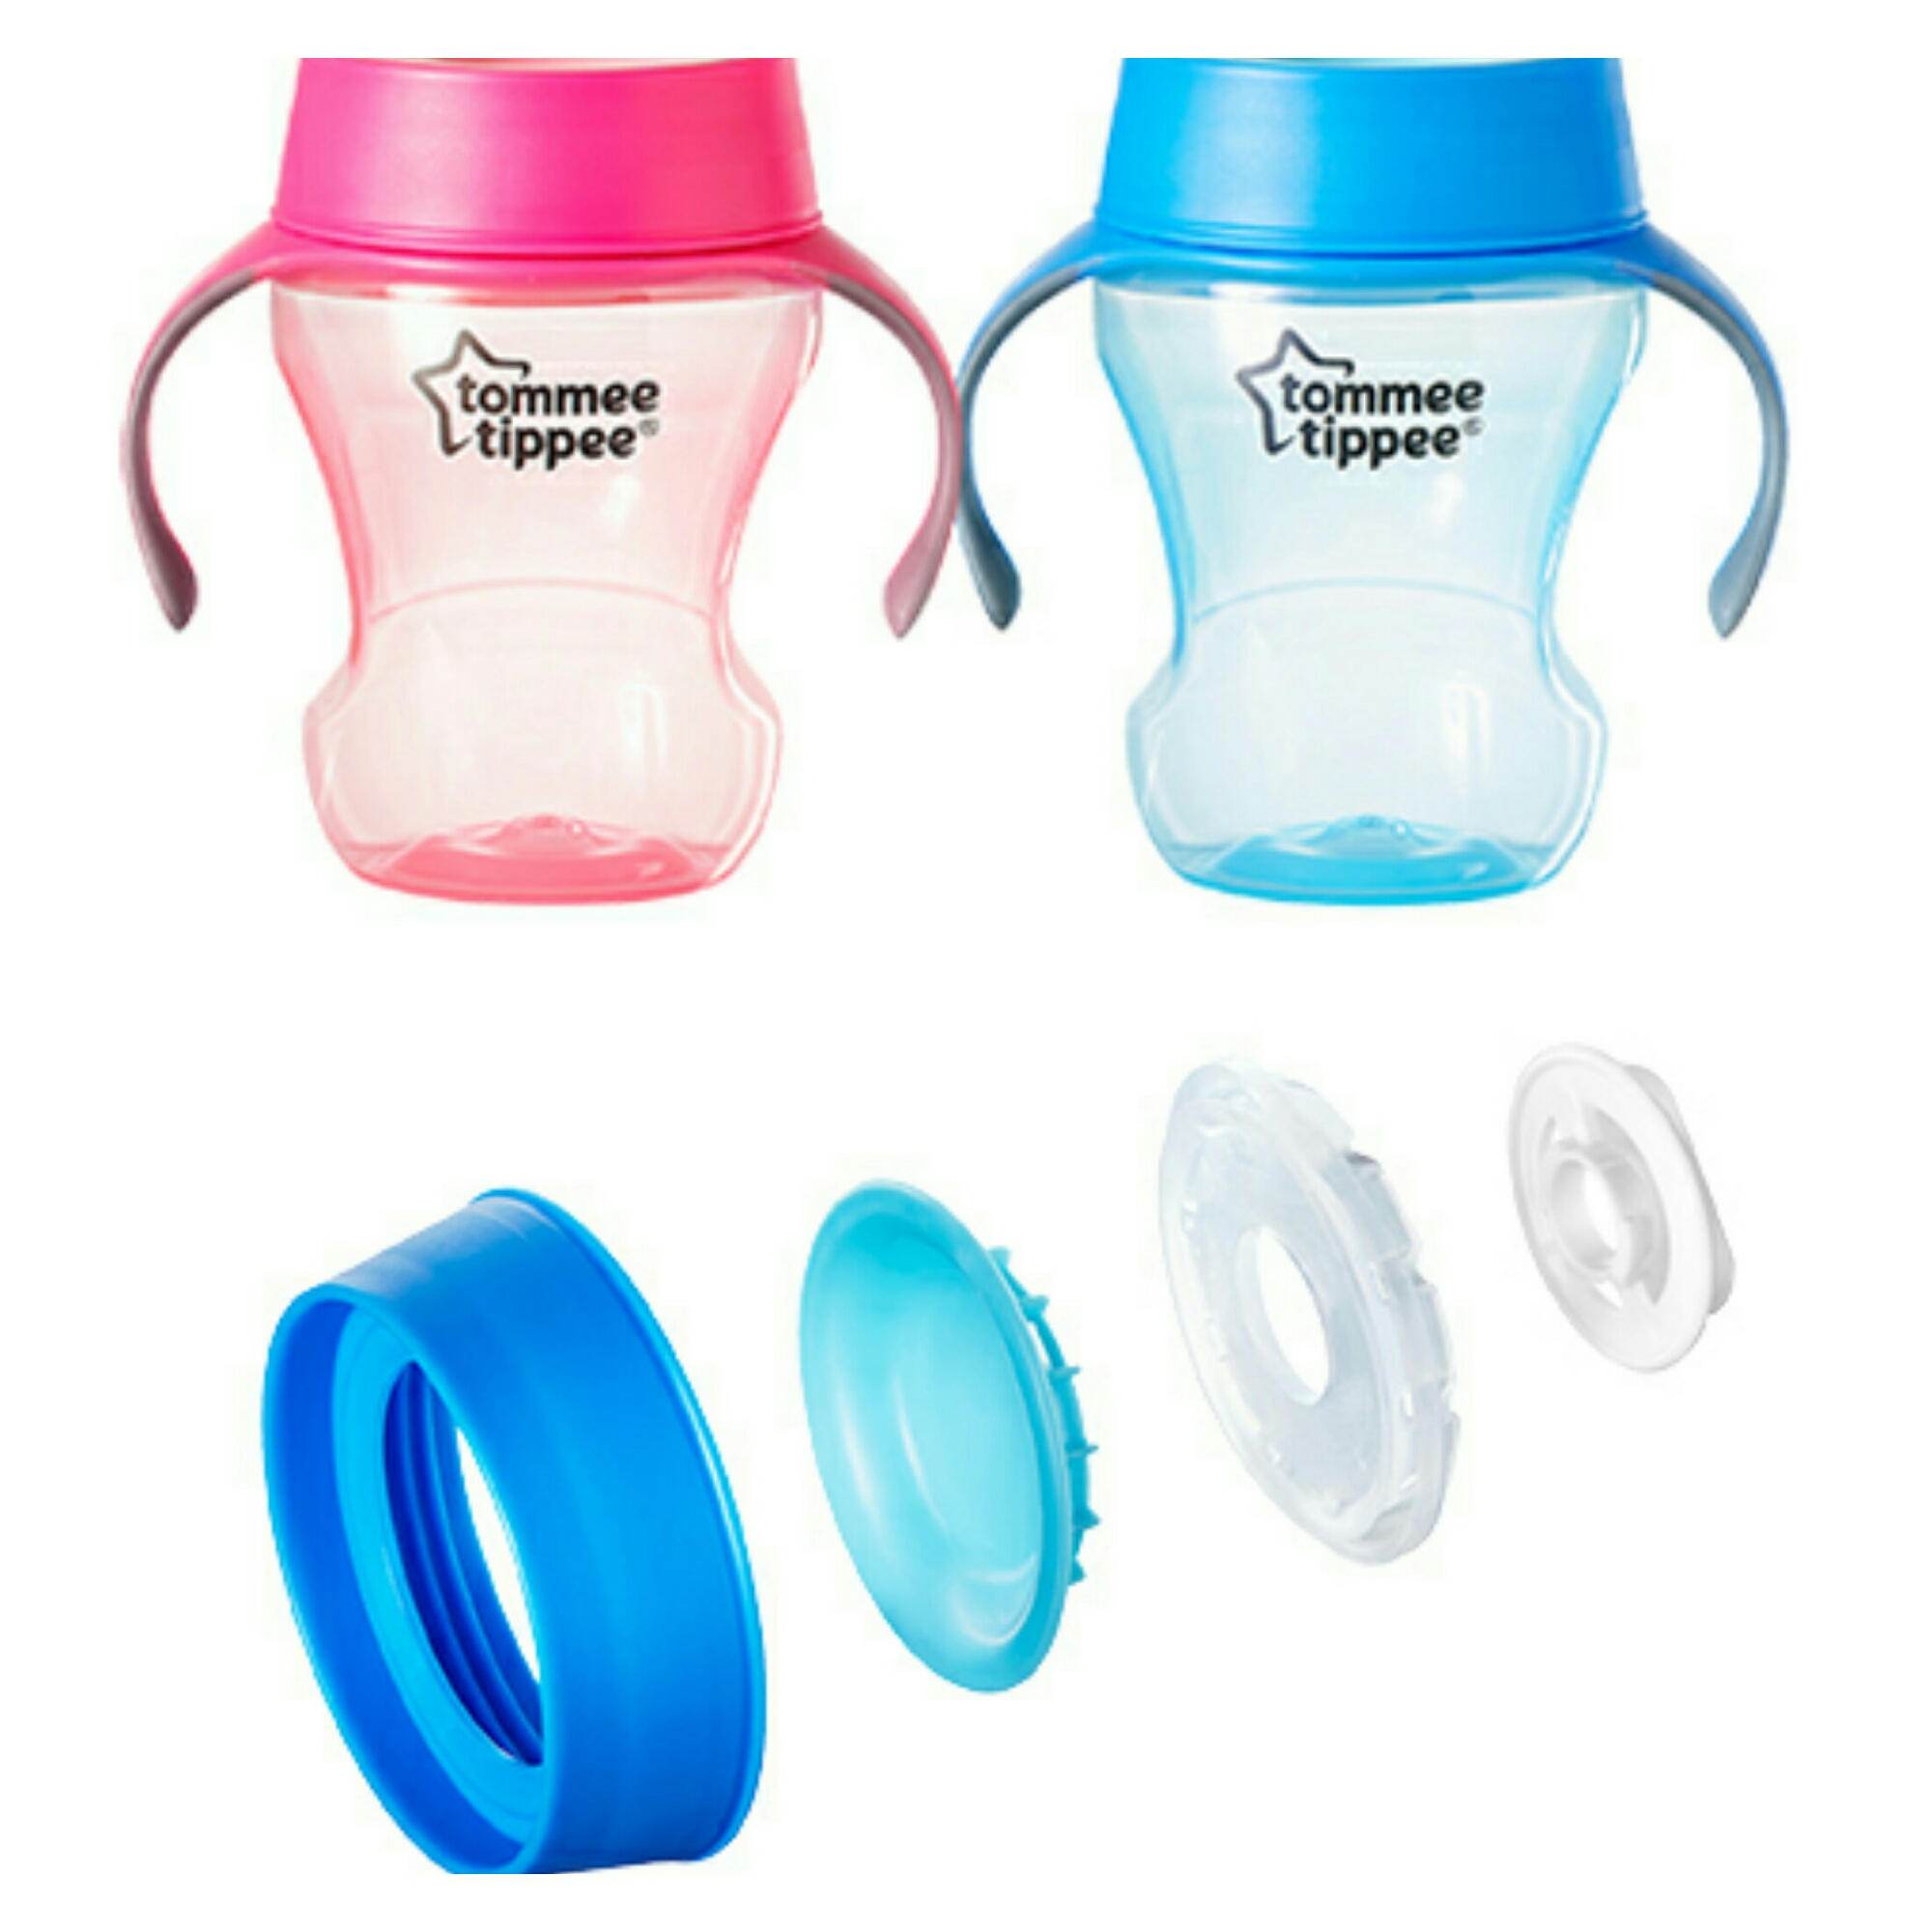 tommee tippee 360 cup instructions